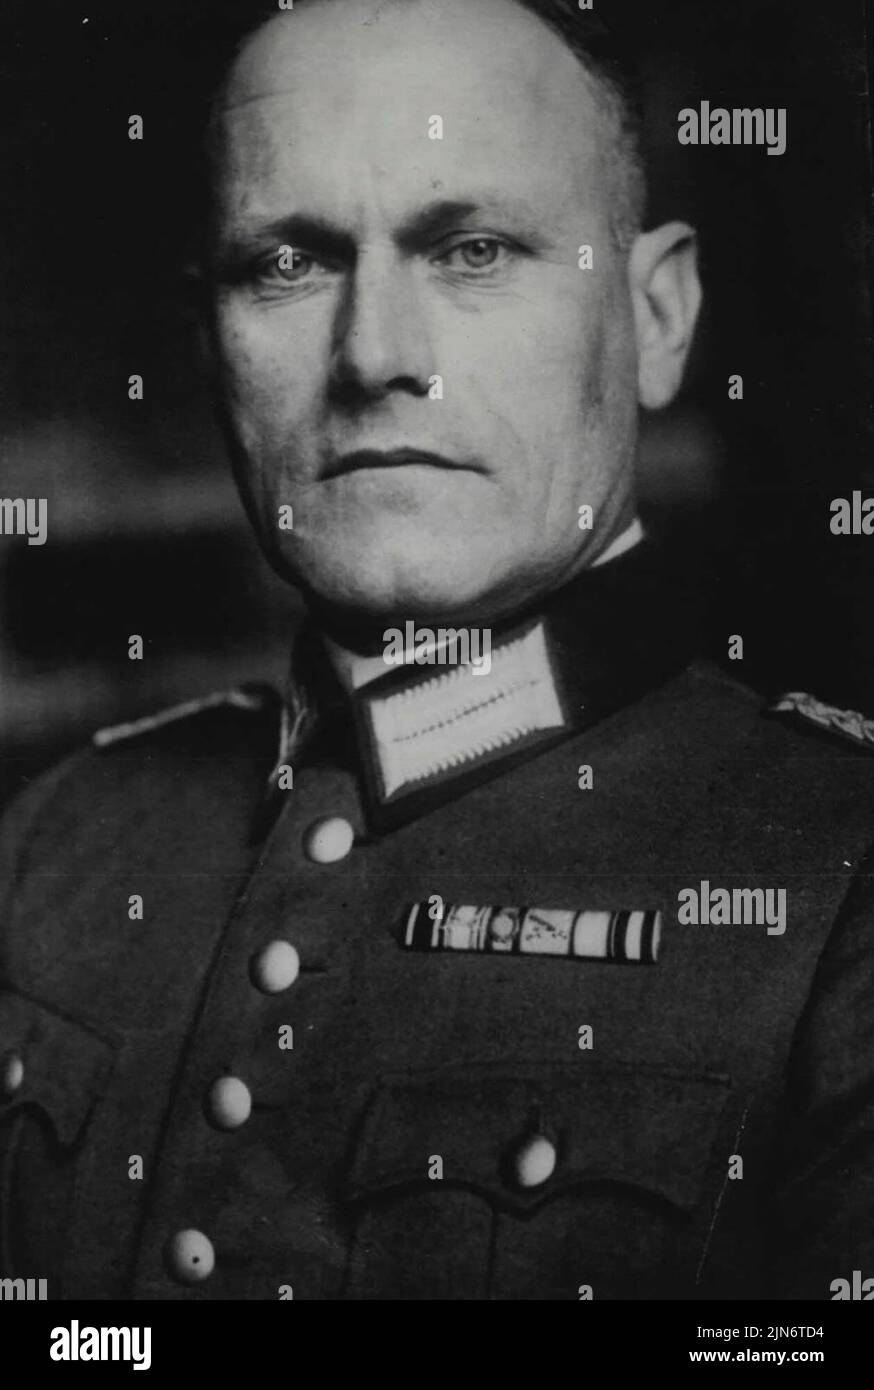 New German Ambassador To Tokio - A portrait of Major General E. Ott, appointed new German Ambassador in Tokio.Major General E. Ott has been appointed new German Ambassador to Tokio, where he has acted as military attach. May 16, 1938. (Photo by Associated Press Photo). Stock Photo